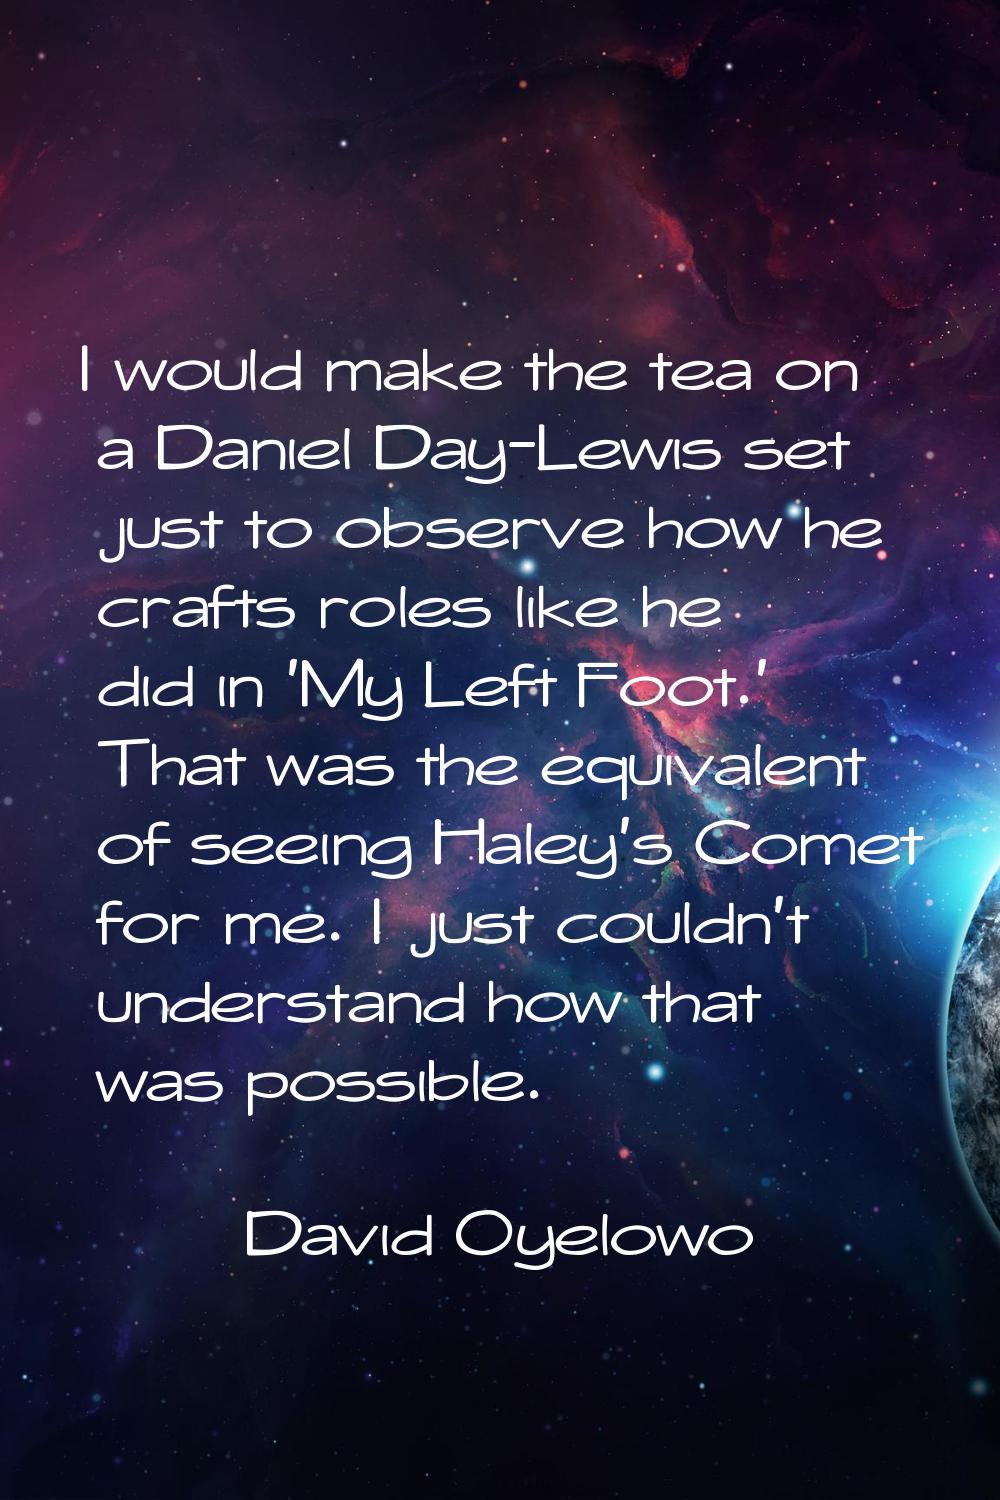 I would make the tea on a Daniel Day-Lewis set just to observe how he crafts roles like he did in '